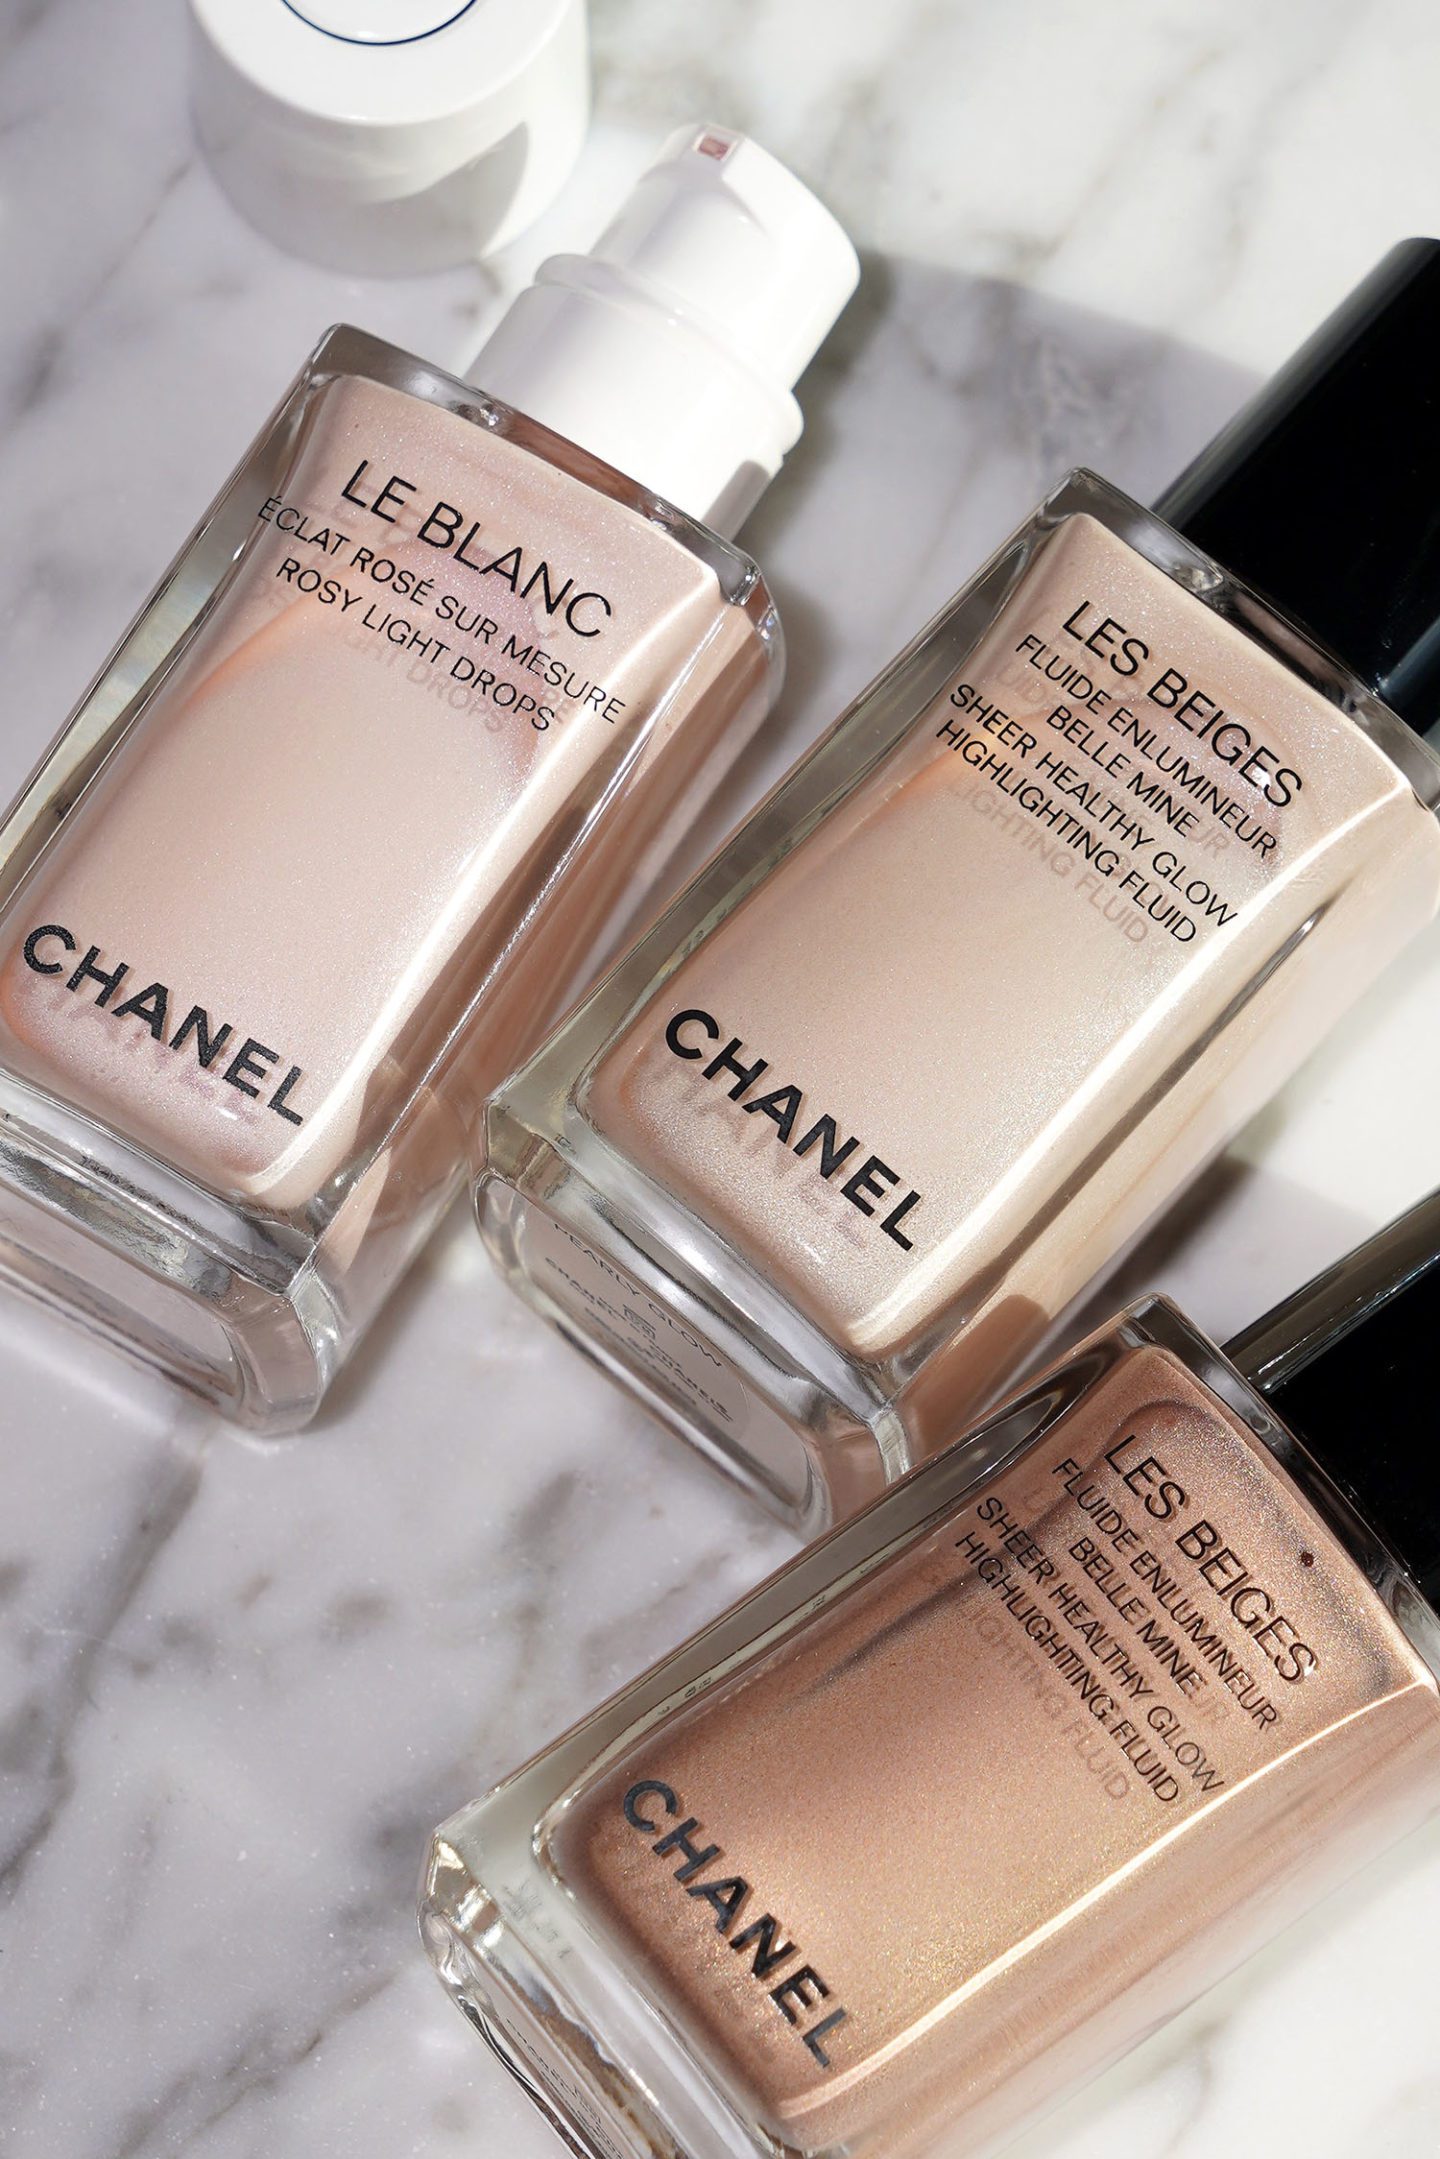 Chanel Le Blanc Rosy Light Drops and Les Beiges Highlighting Fluid